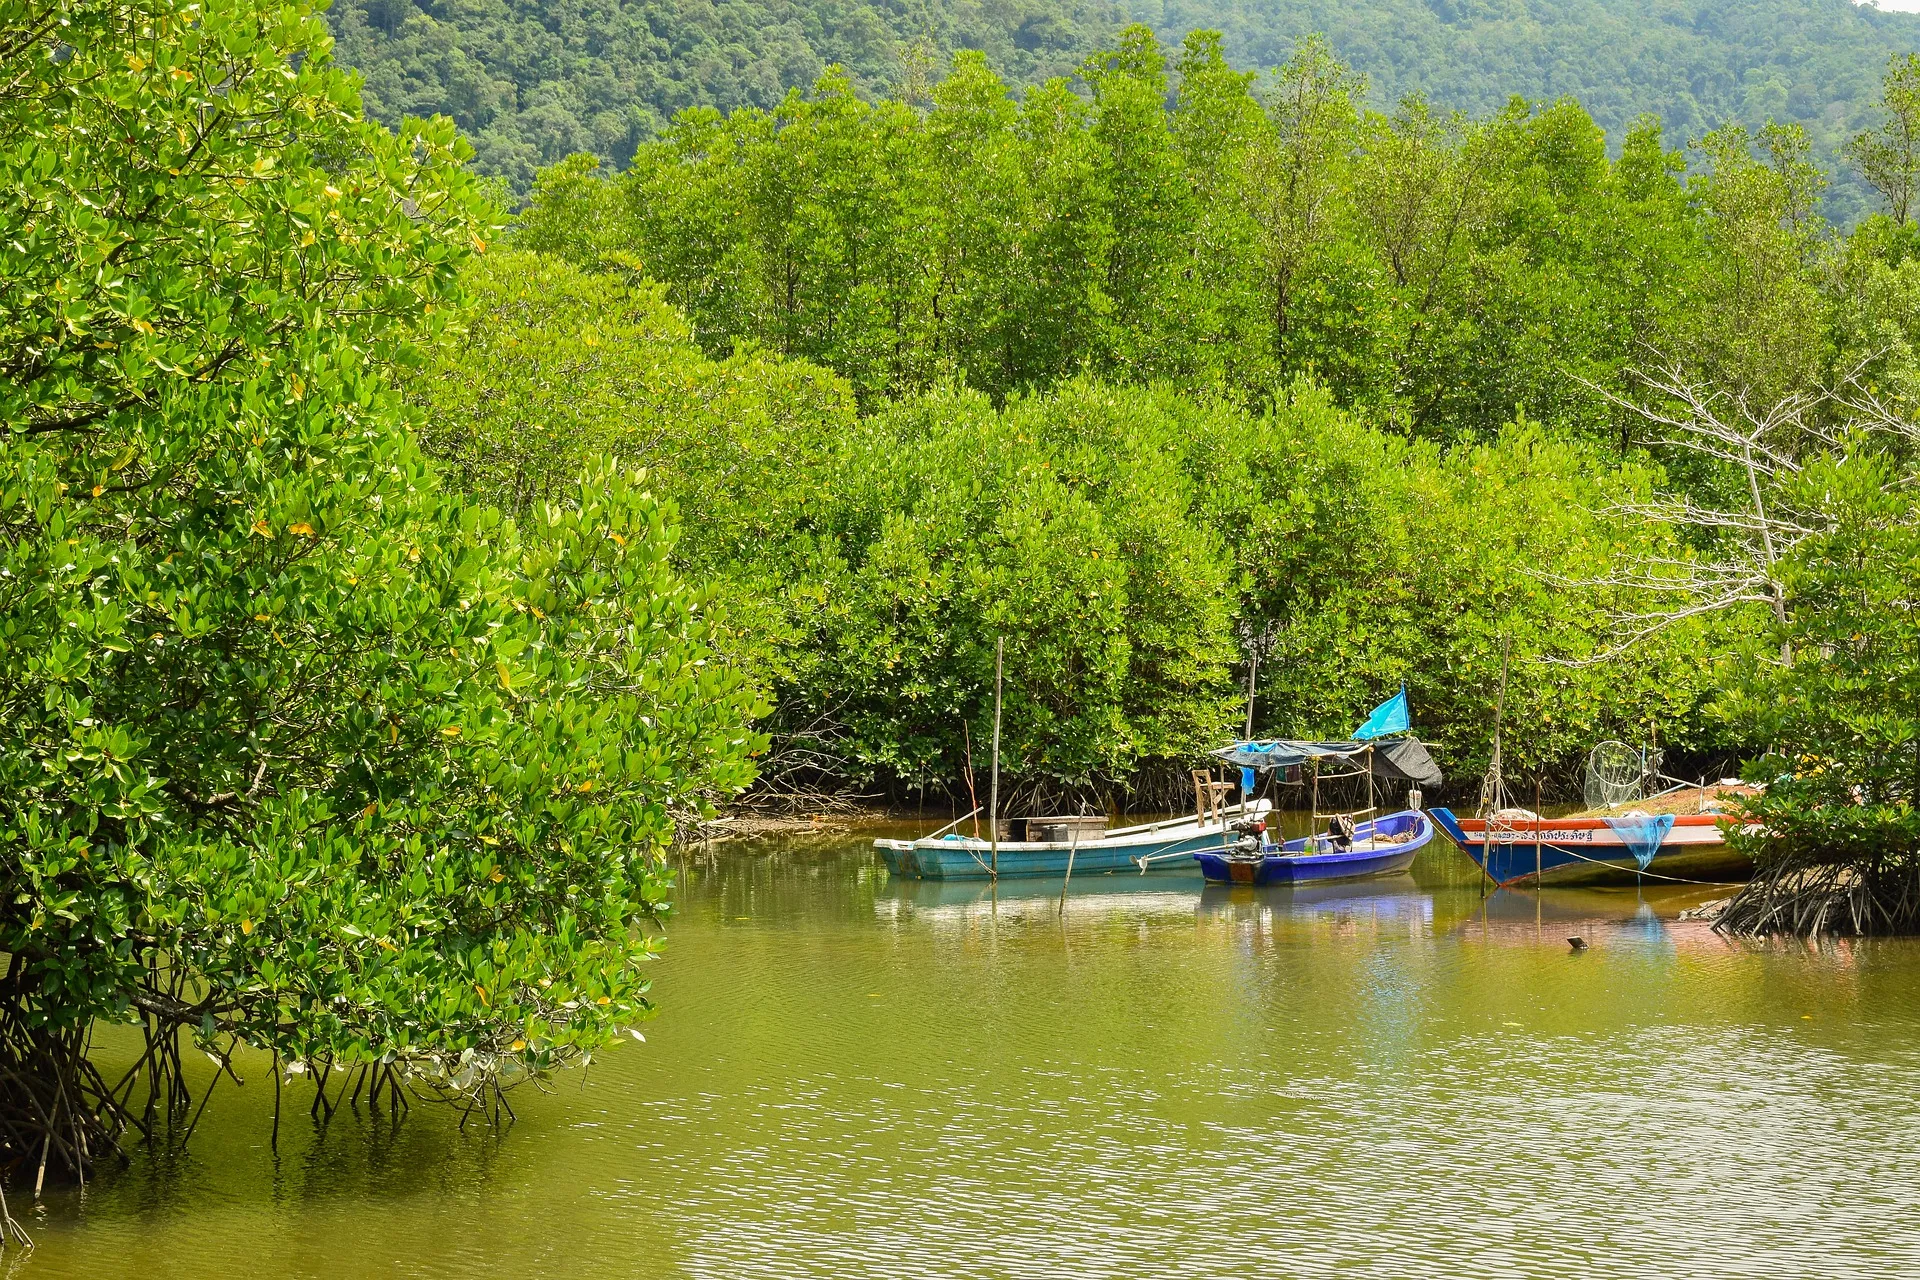 Mangrove forests and small fishing boats